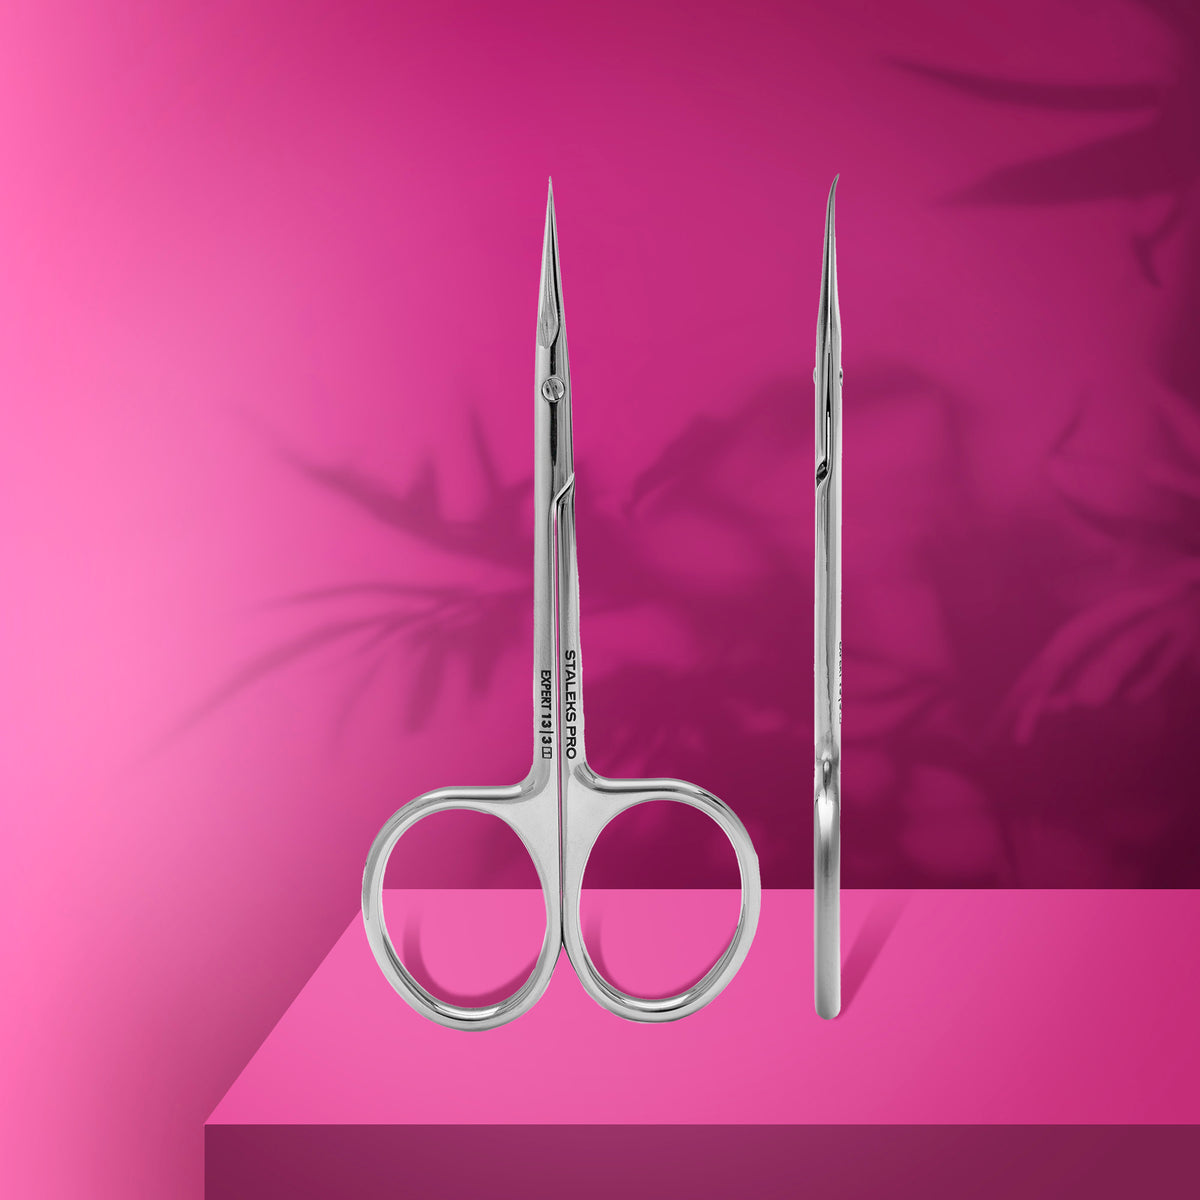 Professional cuticle scissors with hook for left-handed users EXPERT 13 TYPE 3